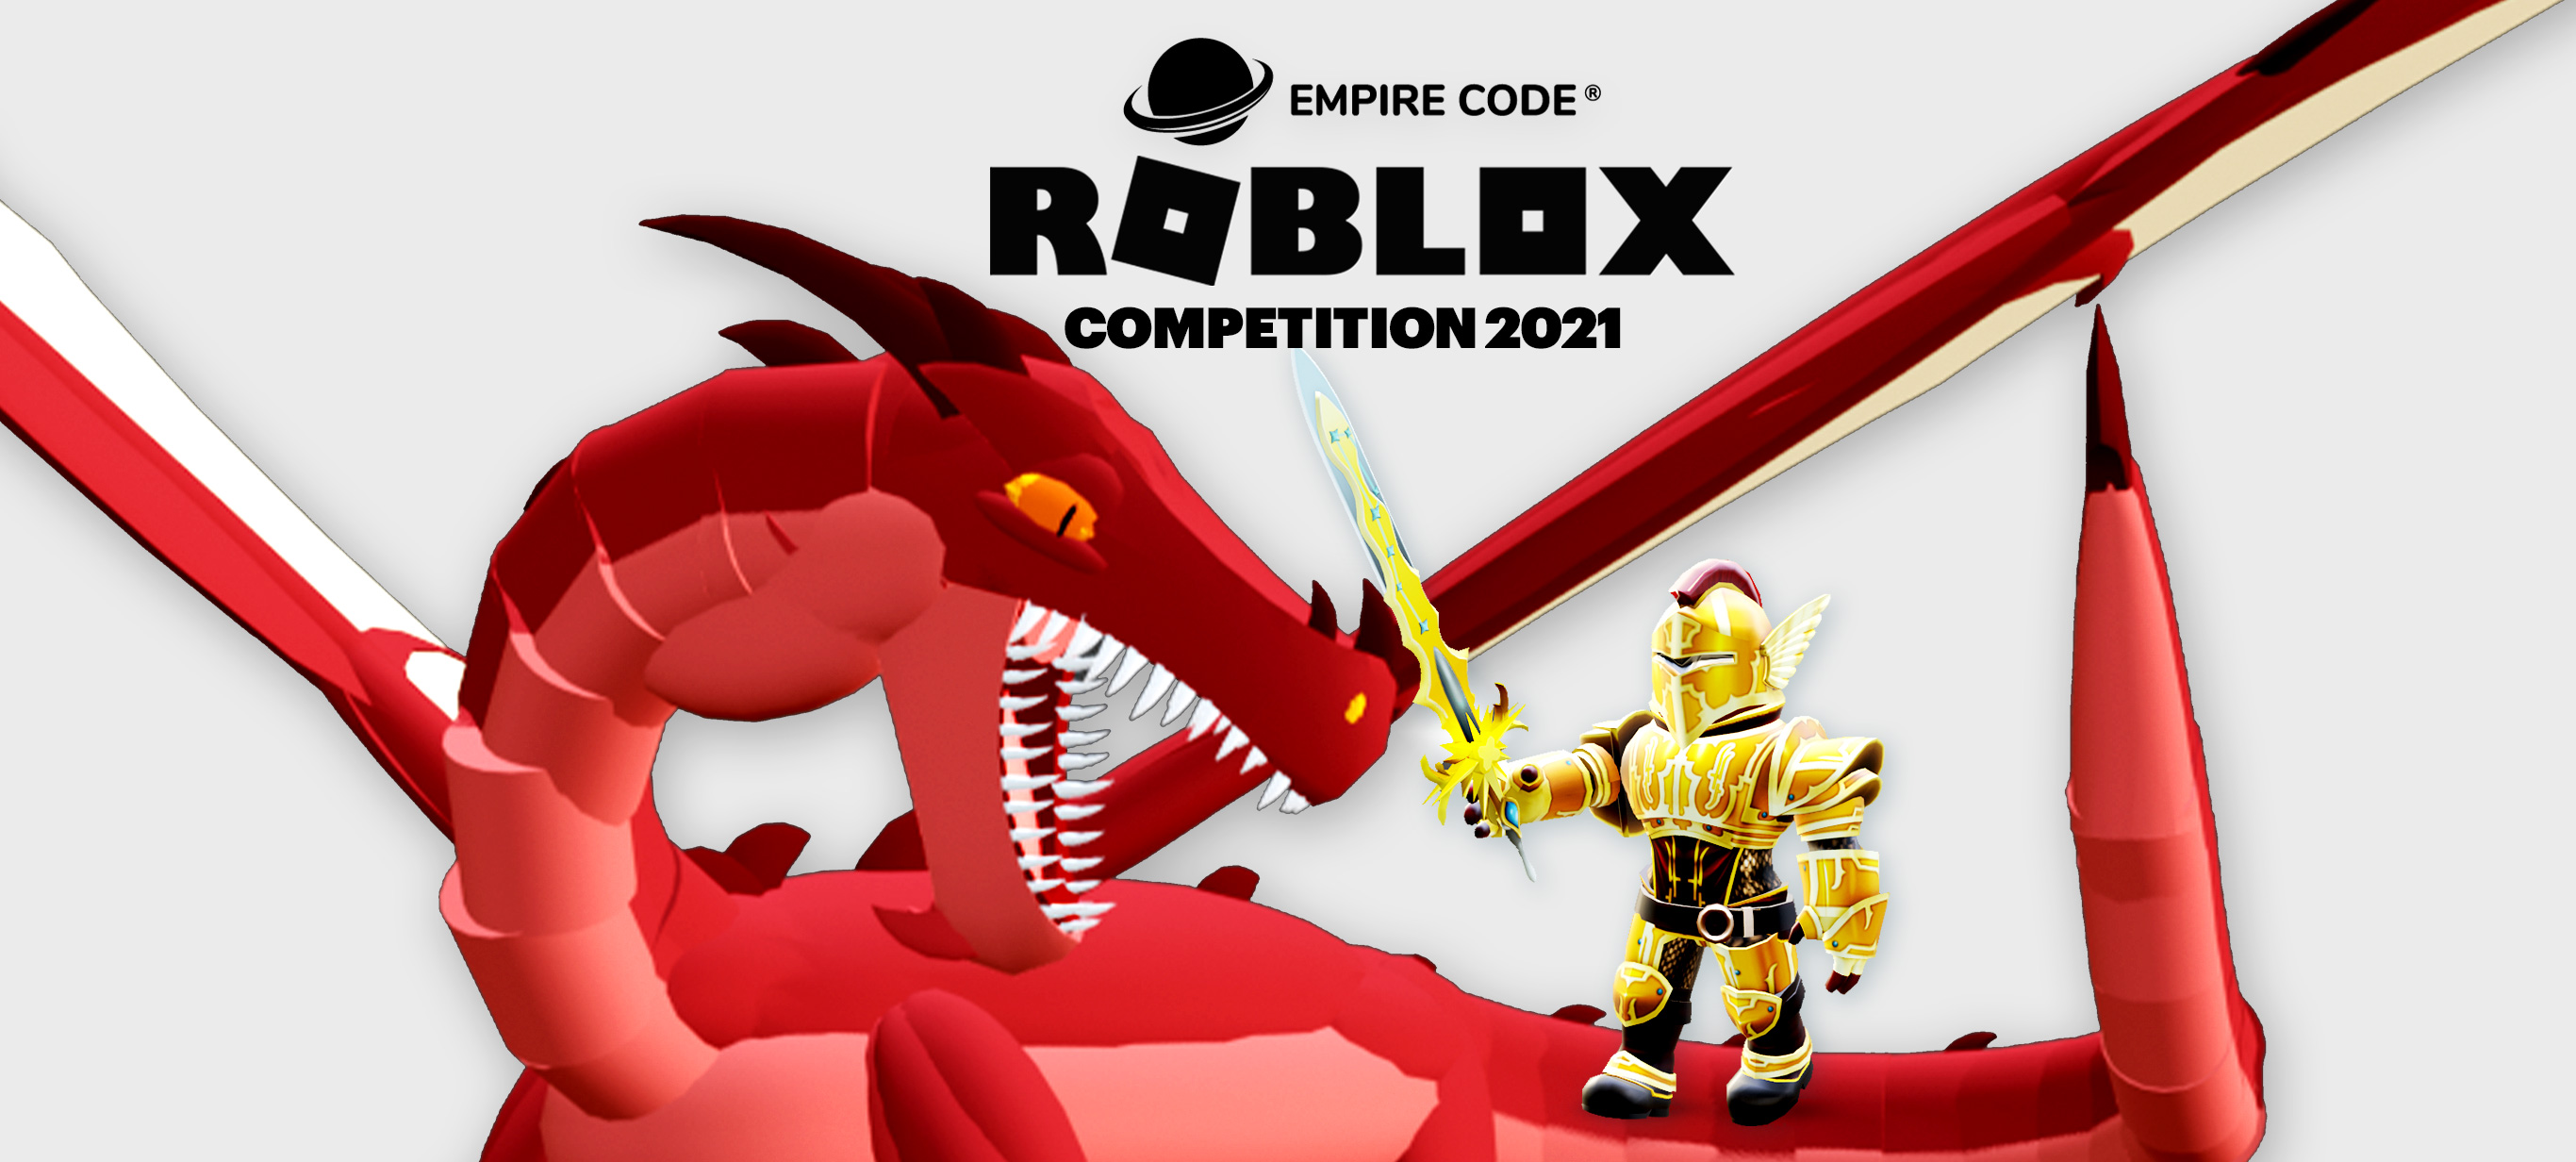 Roblox Archives - Page 2 of 2 - Singapore Coding Club